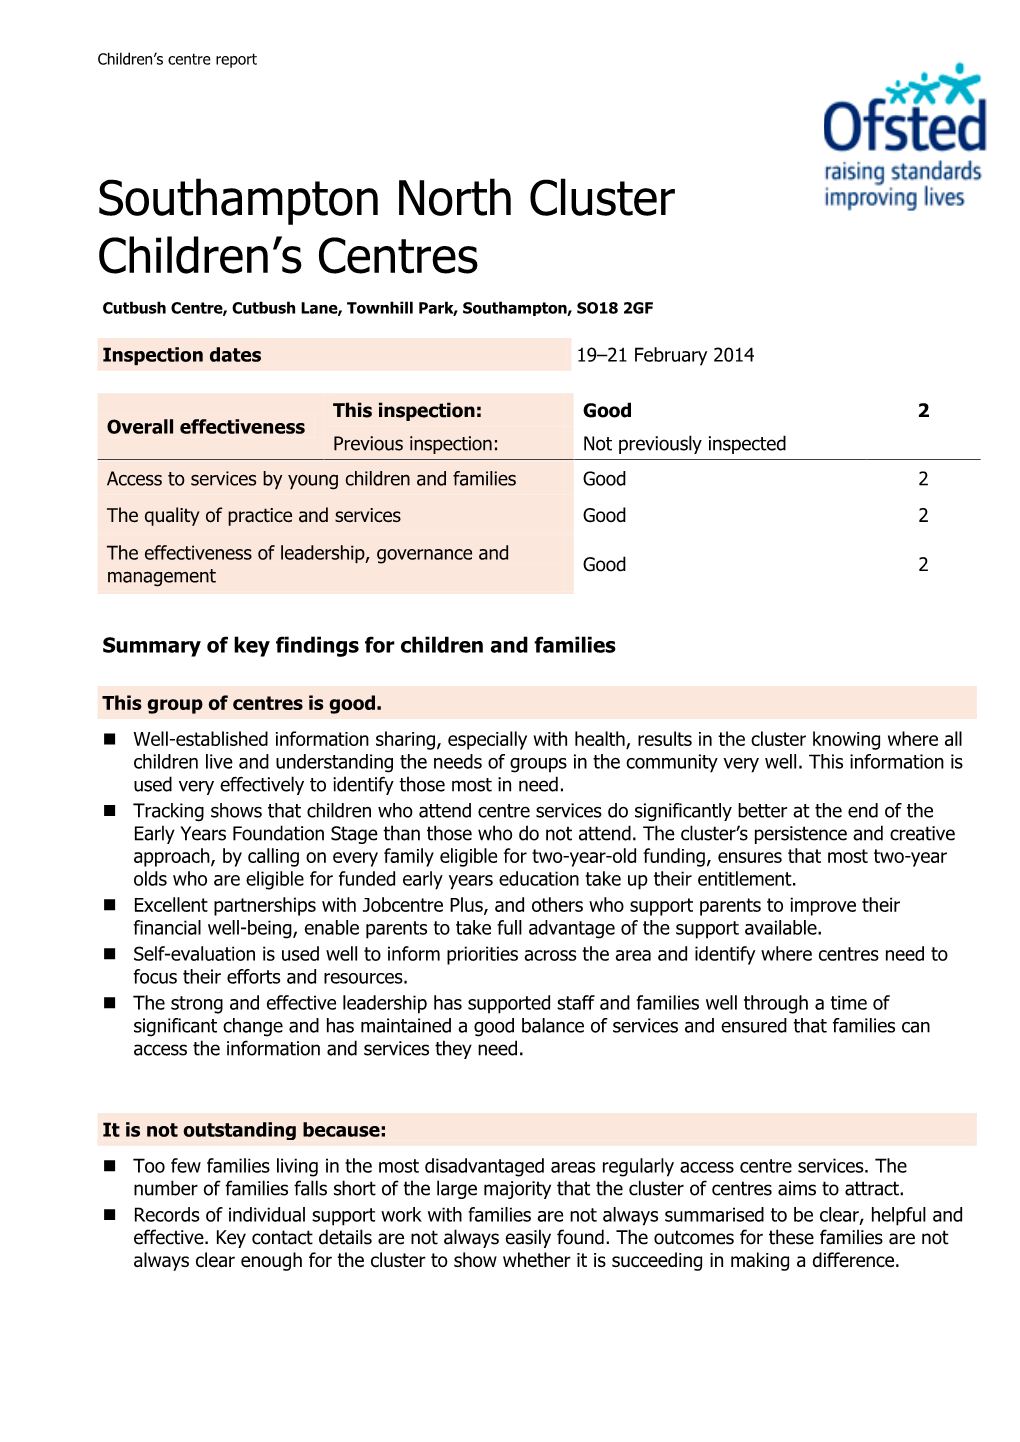 Southampton North Cluster Children's Centres